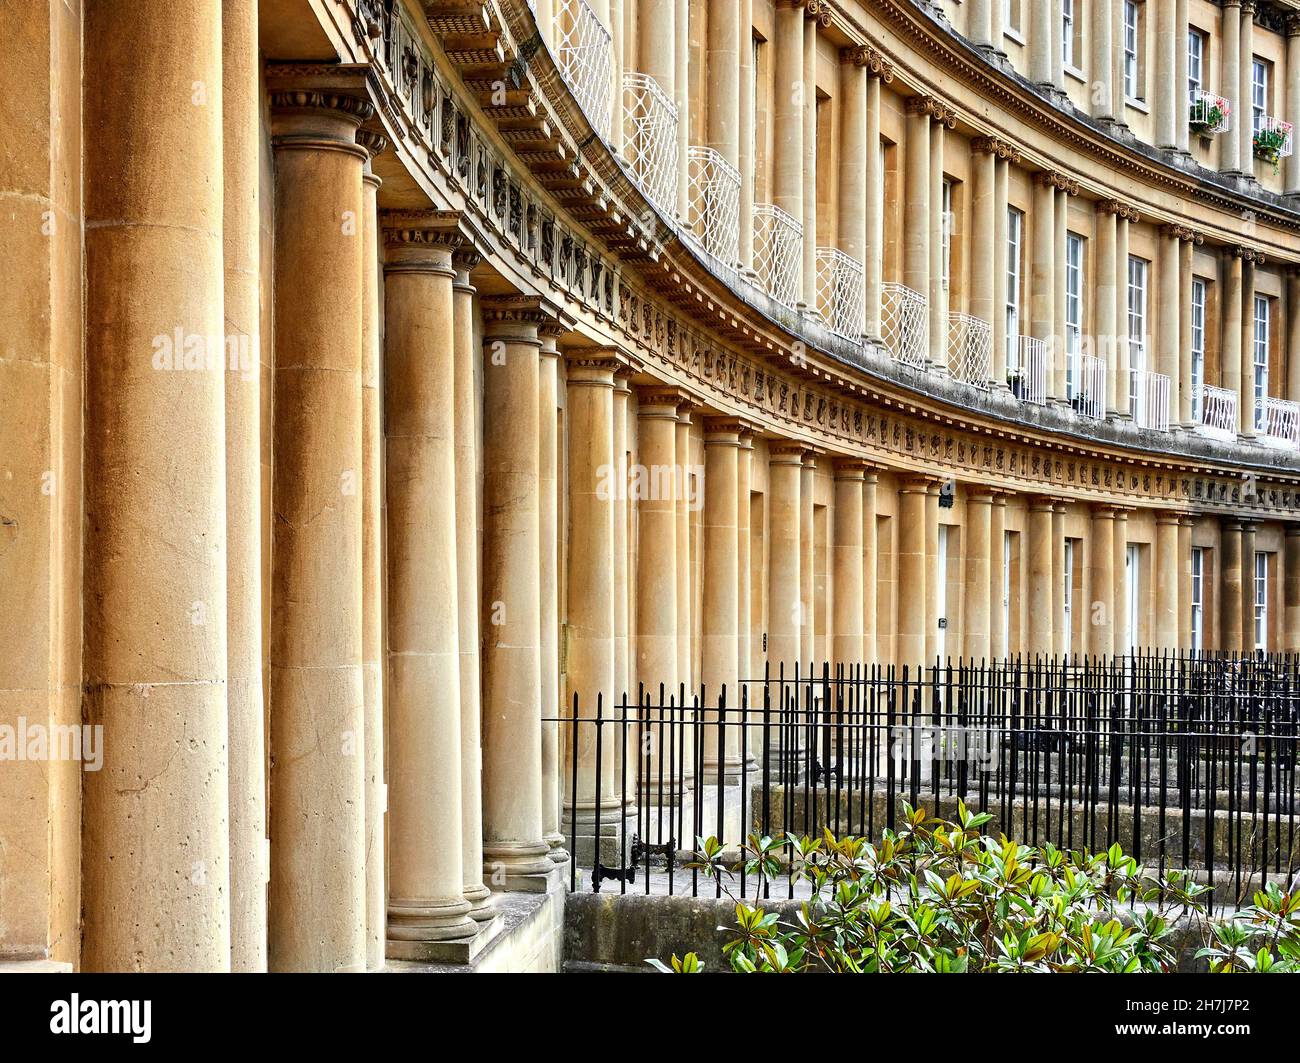 Georgian architecture with frieze and columns of ascending orders at The Circus in Bath Somerset UK designed by John Wood Stock Photo